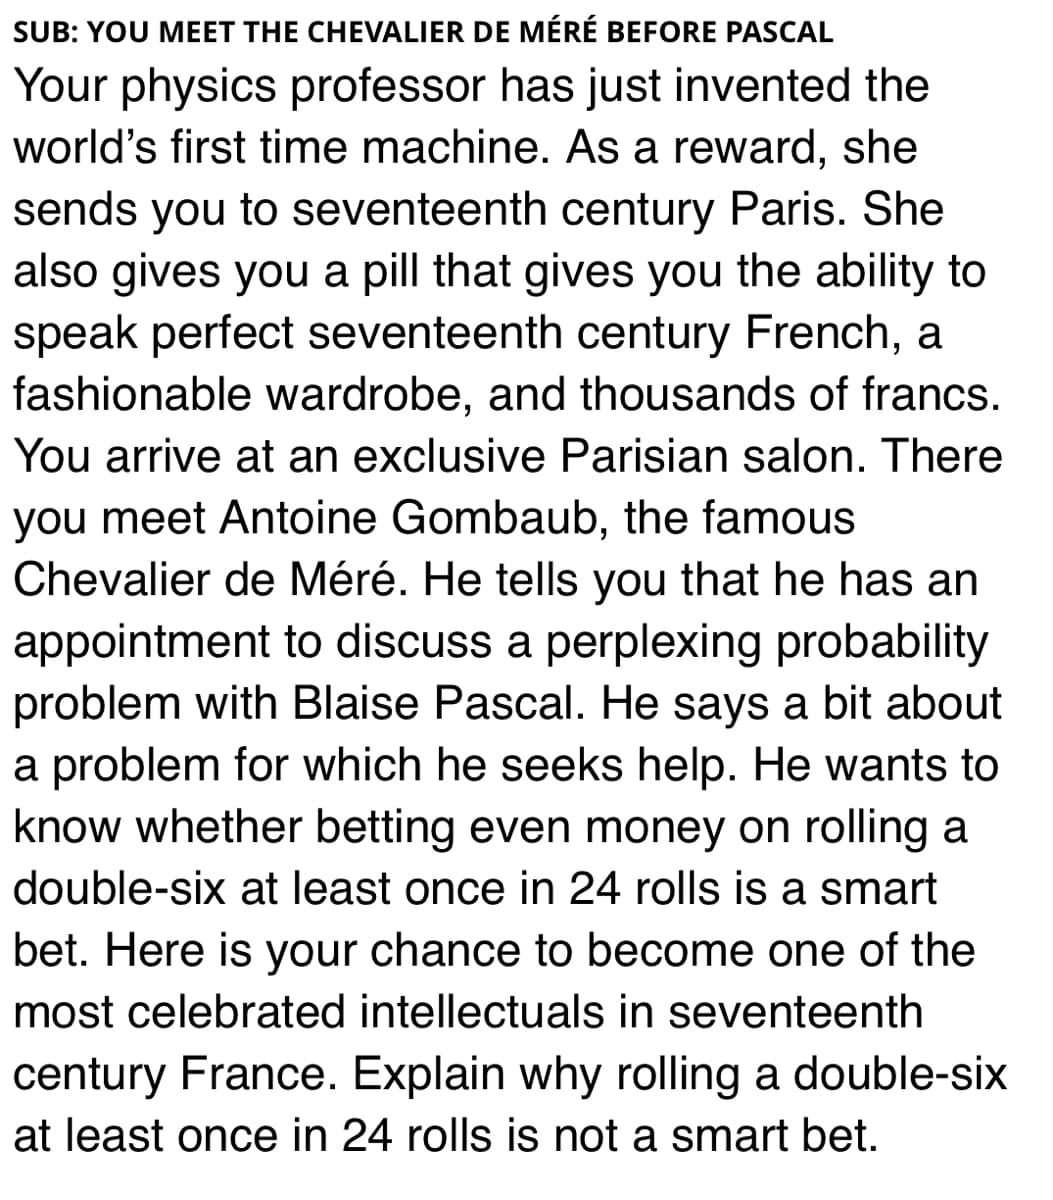 SUB: YOU MEET THE CHEVALIER DE MÉRÉ BEFORE PASCAL
Your physics professor has just invented the
world's first time machine. As a reward, she
sends you to seventeenth century Paris. She
also gives you a pill that gives you the ability to
speak perfect seventeenth century French, a
fashionable wardrobe, and thousands of francs.
You arrive at an exclusive Parisian salon. There
you meet Antoine Gombaub, the famous
Chevalier de Méré. He tells you that he has an
appointment to discuss a perplexing probability
problem with Blaise Pascal. He says a bit about
a problem for which he seeks help. He wants to
know whether betting even money on rolling a
double-six at least once in 24 rolls is a smart
bet. Here is your chance to become one of the
most celebrated intellectuals in seventeenth
century France. Explain why rolling a double-six
at least once in 24 rolls is not a smart bet.
